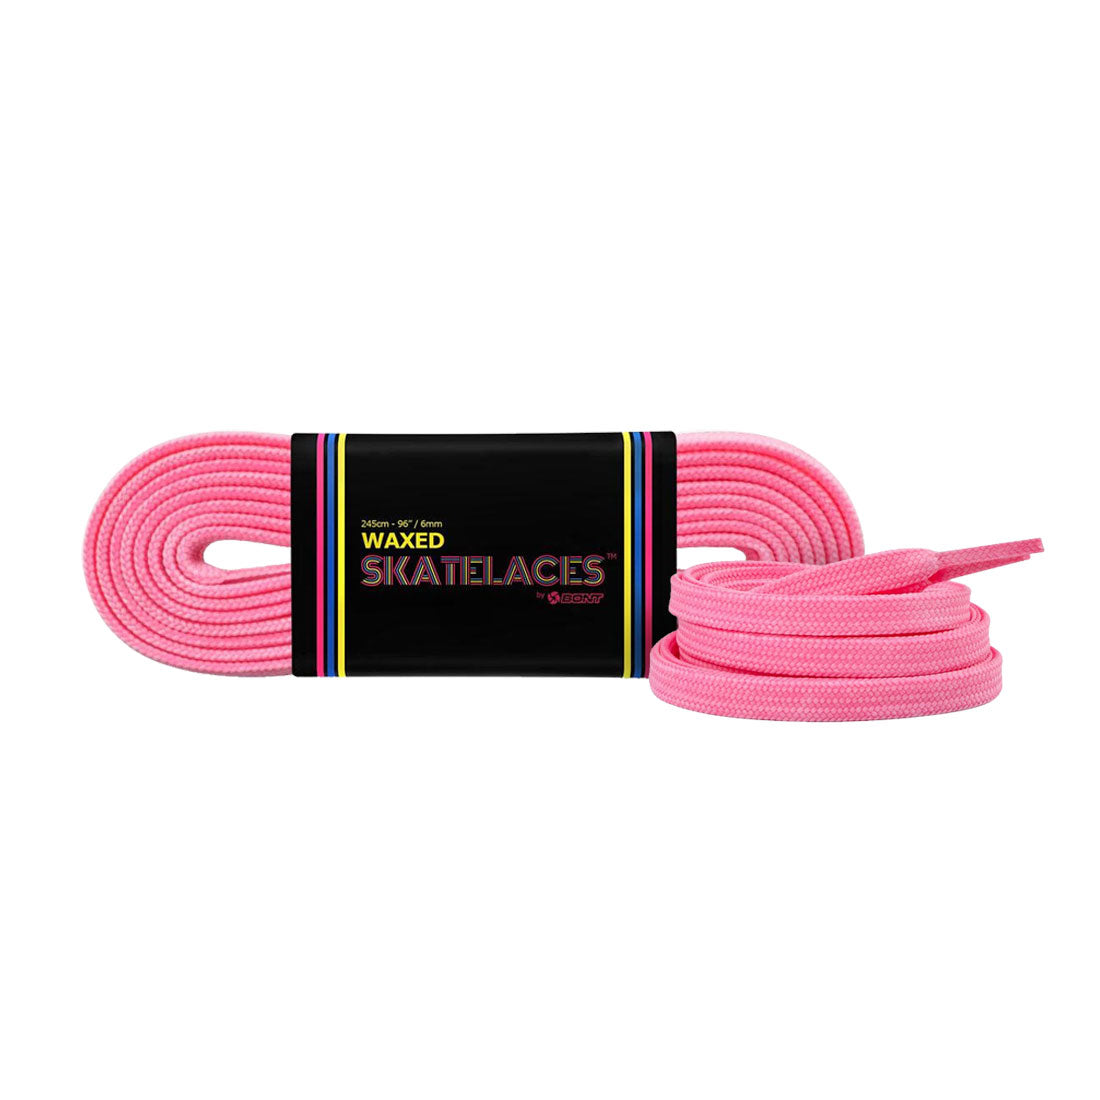 Bont Waxed 8mm Laces - 200cm/79in Cosmo Pink Laces